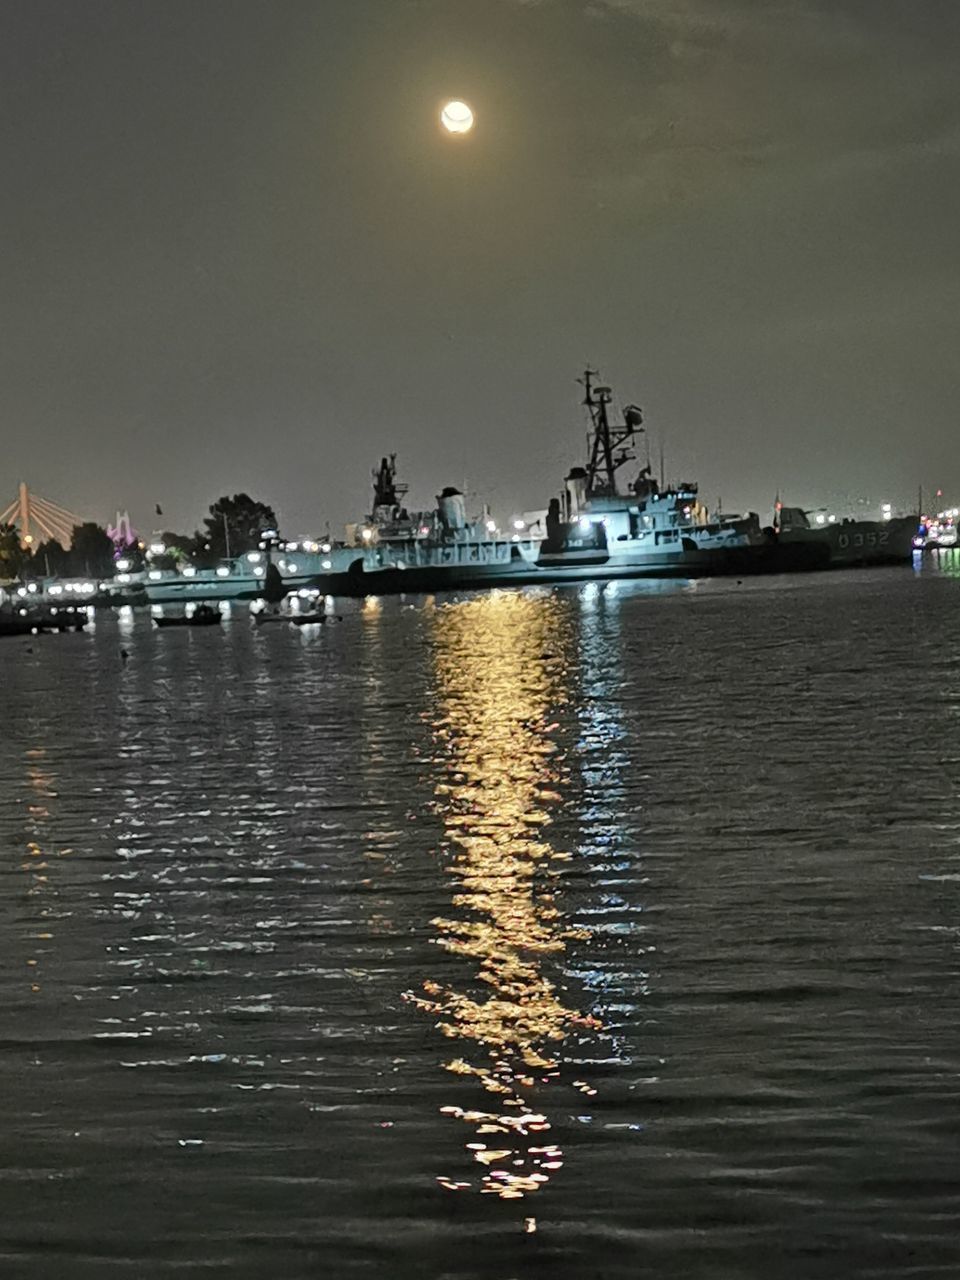 BOATS IN SEA AT NIGHT